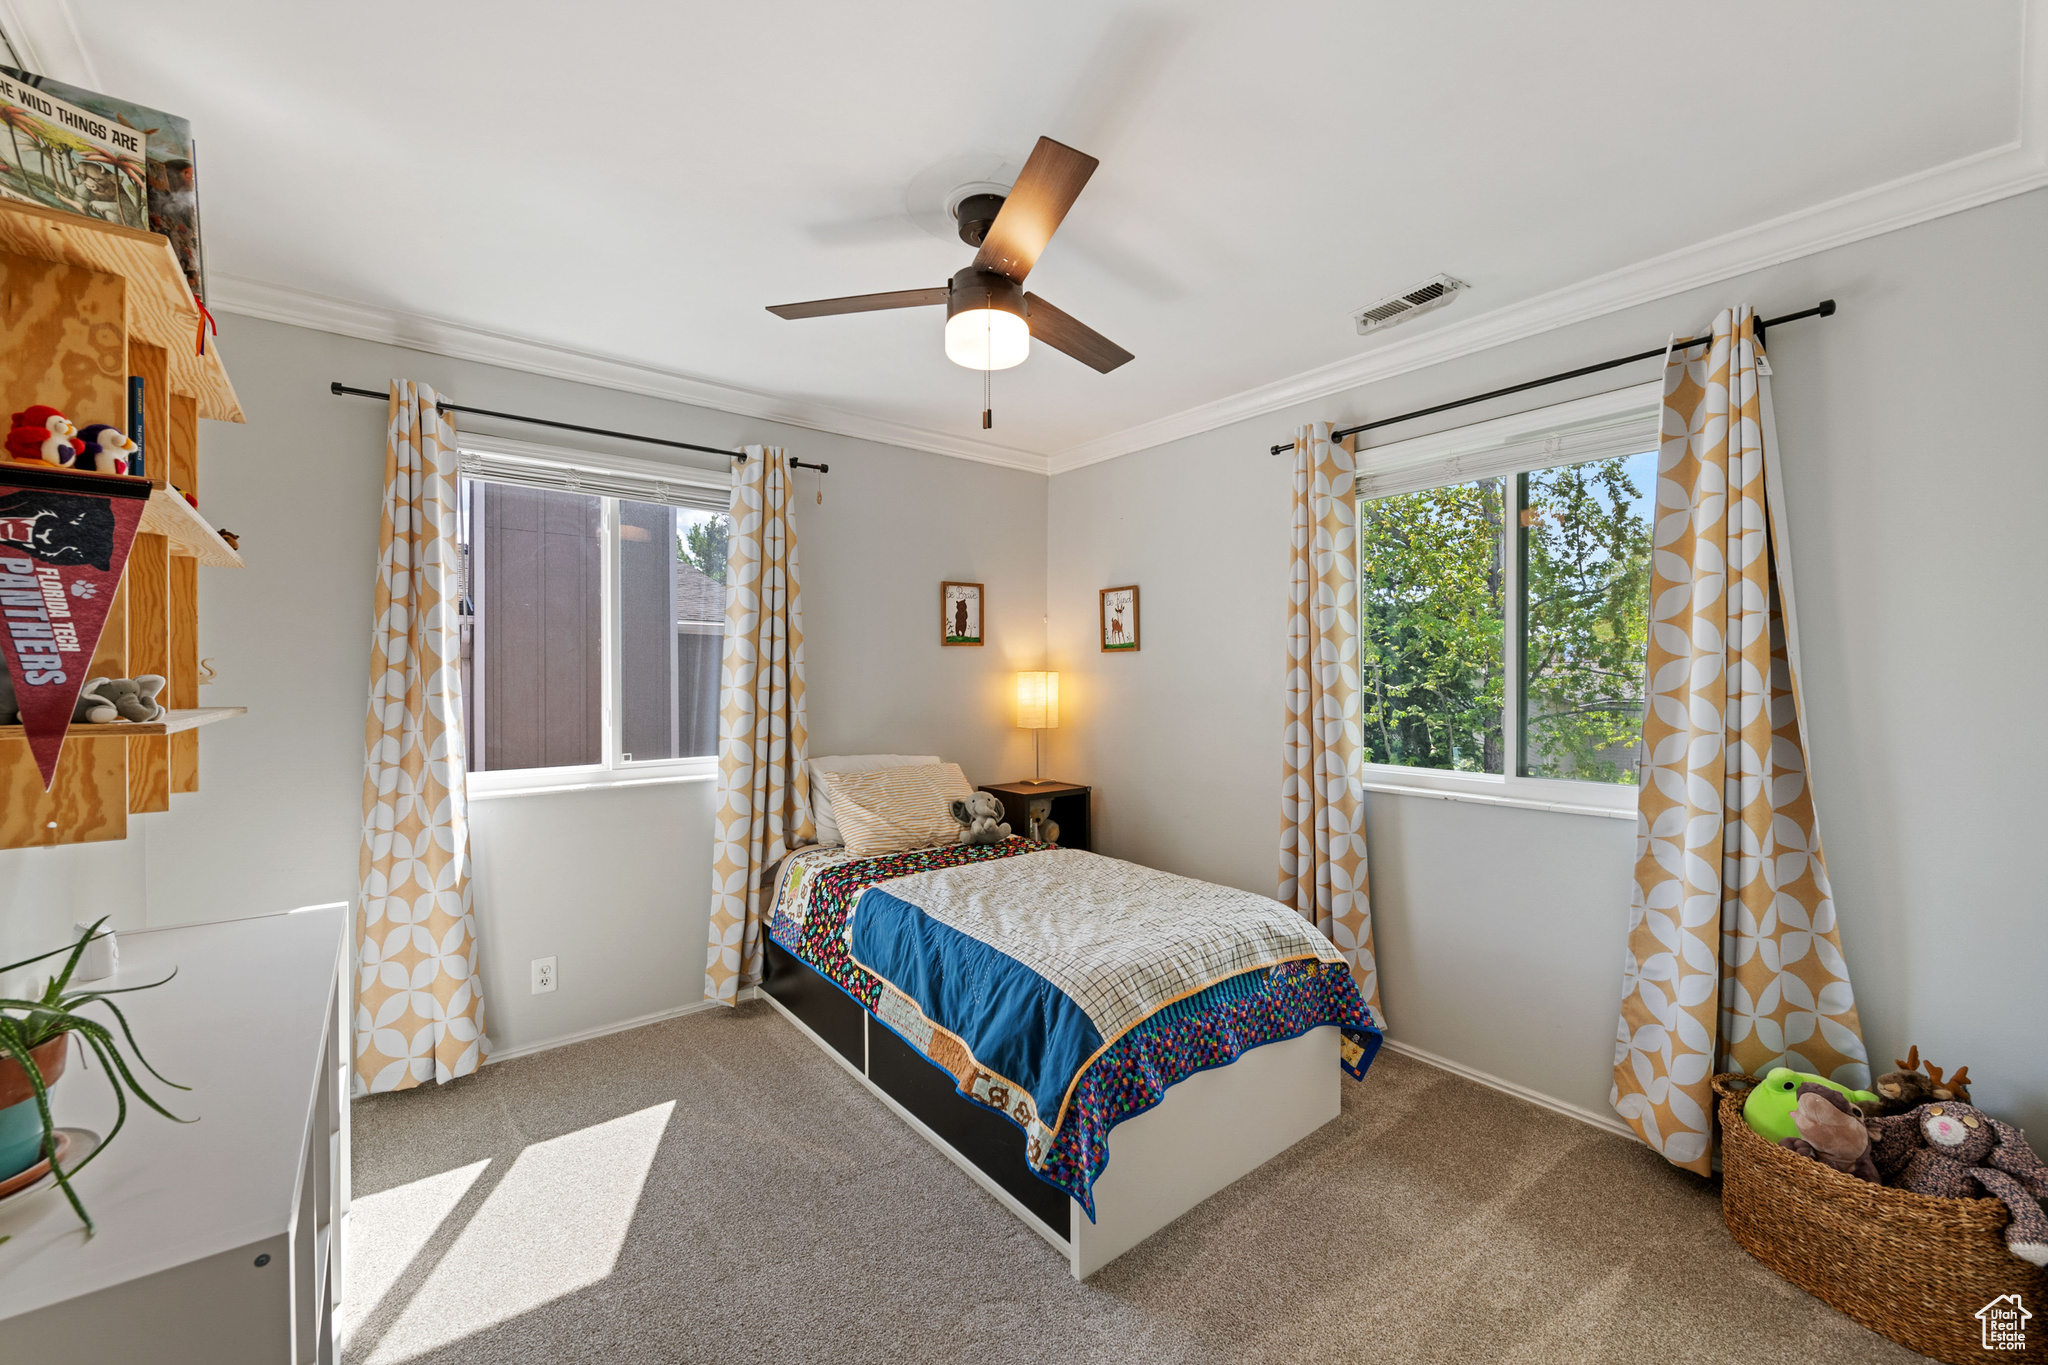 Carpeted bedroom featuring ceiling fan and crown molding